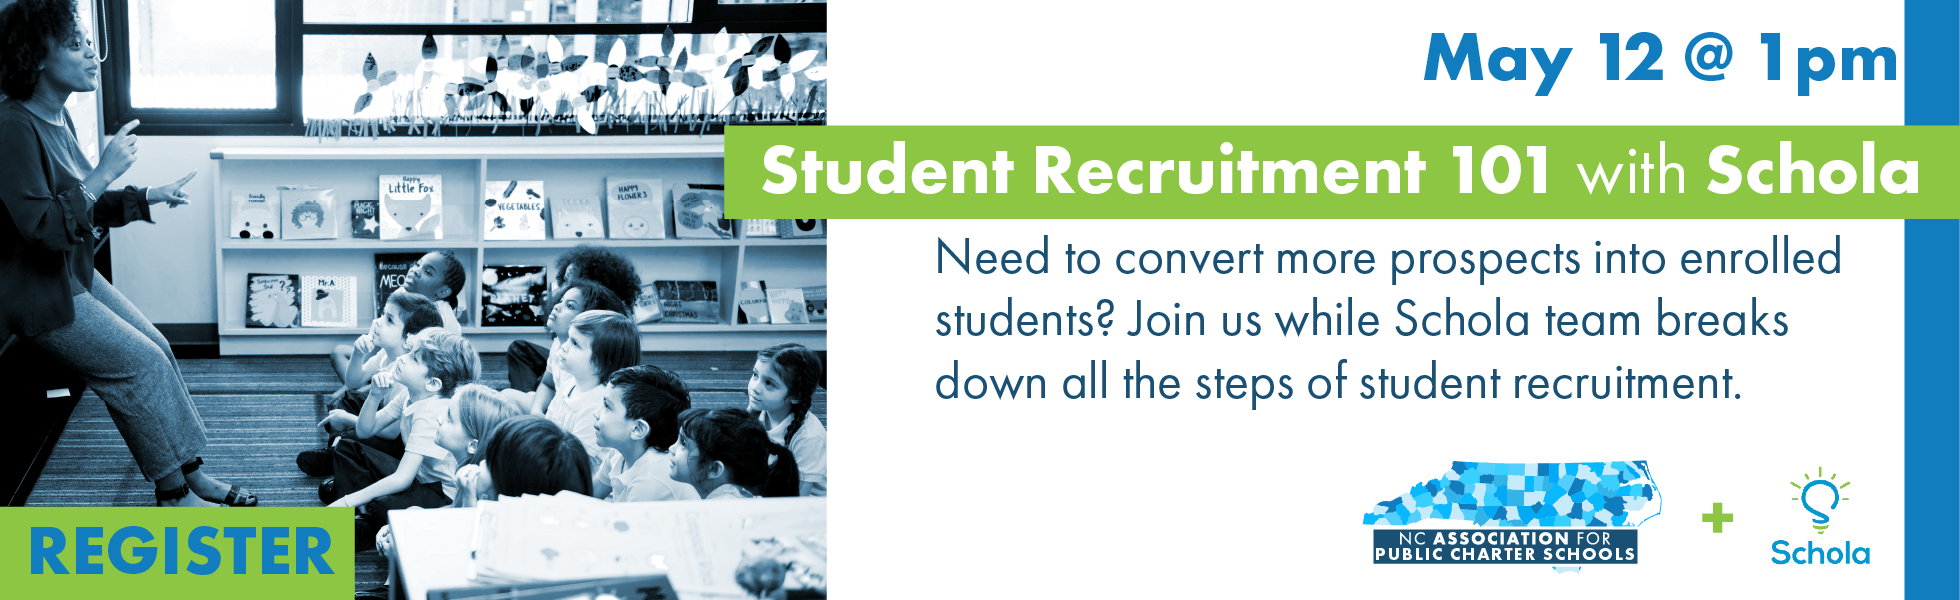 Click image to register for our May 12 webinar: Student Recruitment 101 with Schola